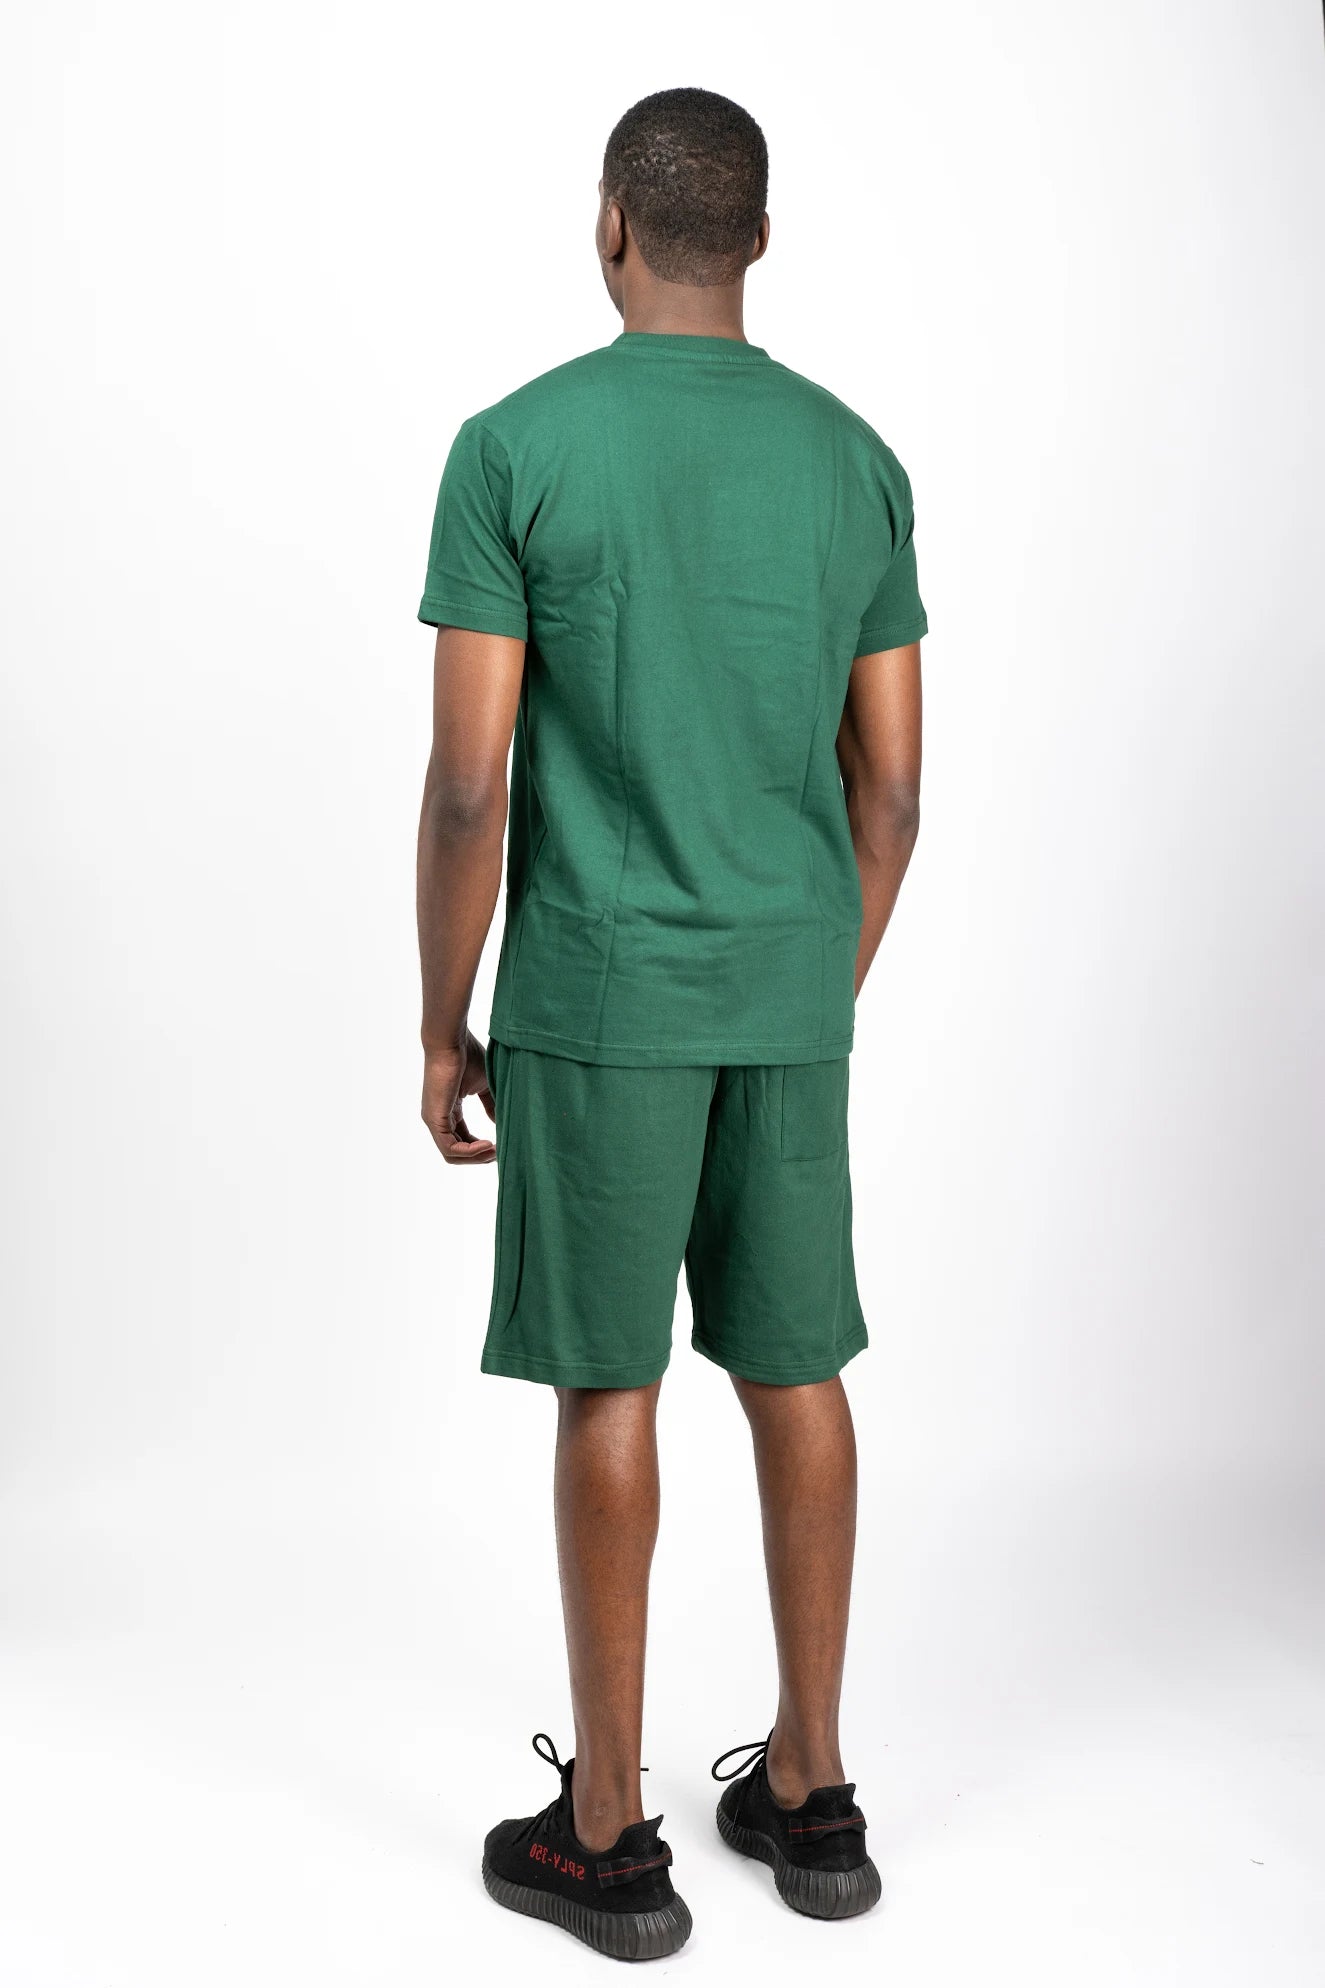 Forest green t-shirt and short sets